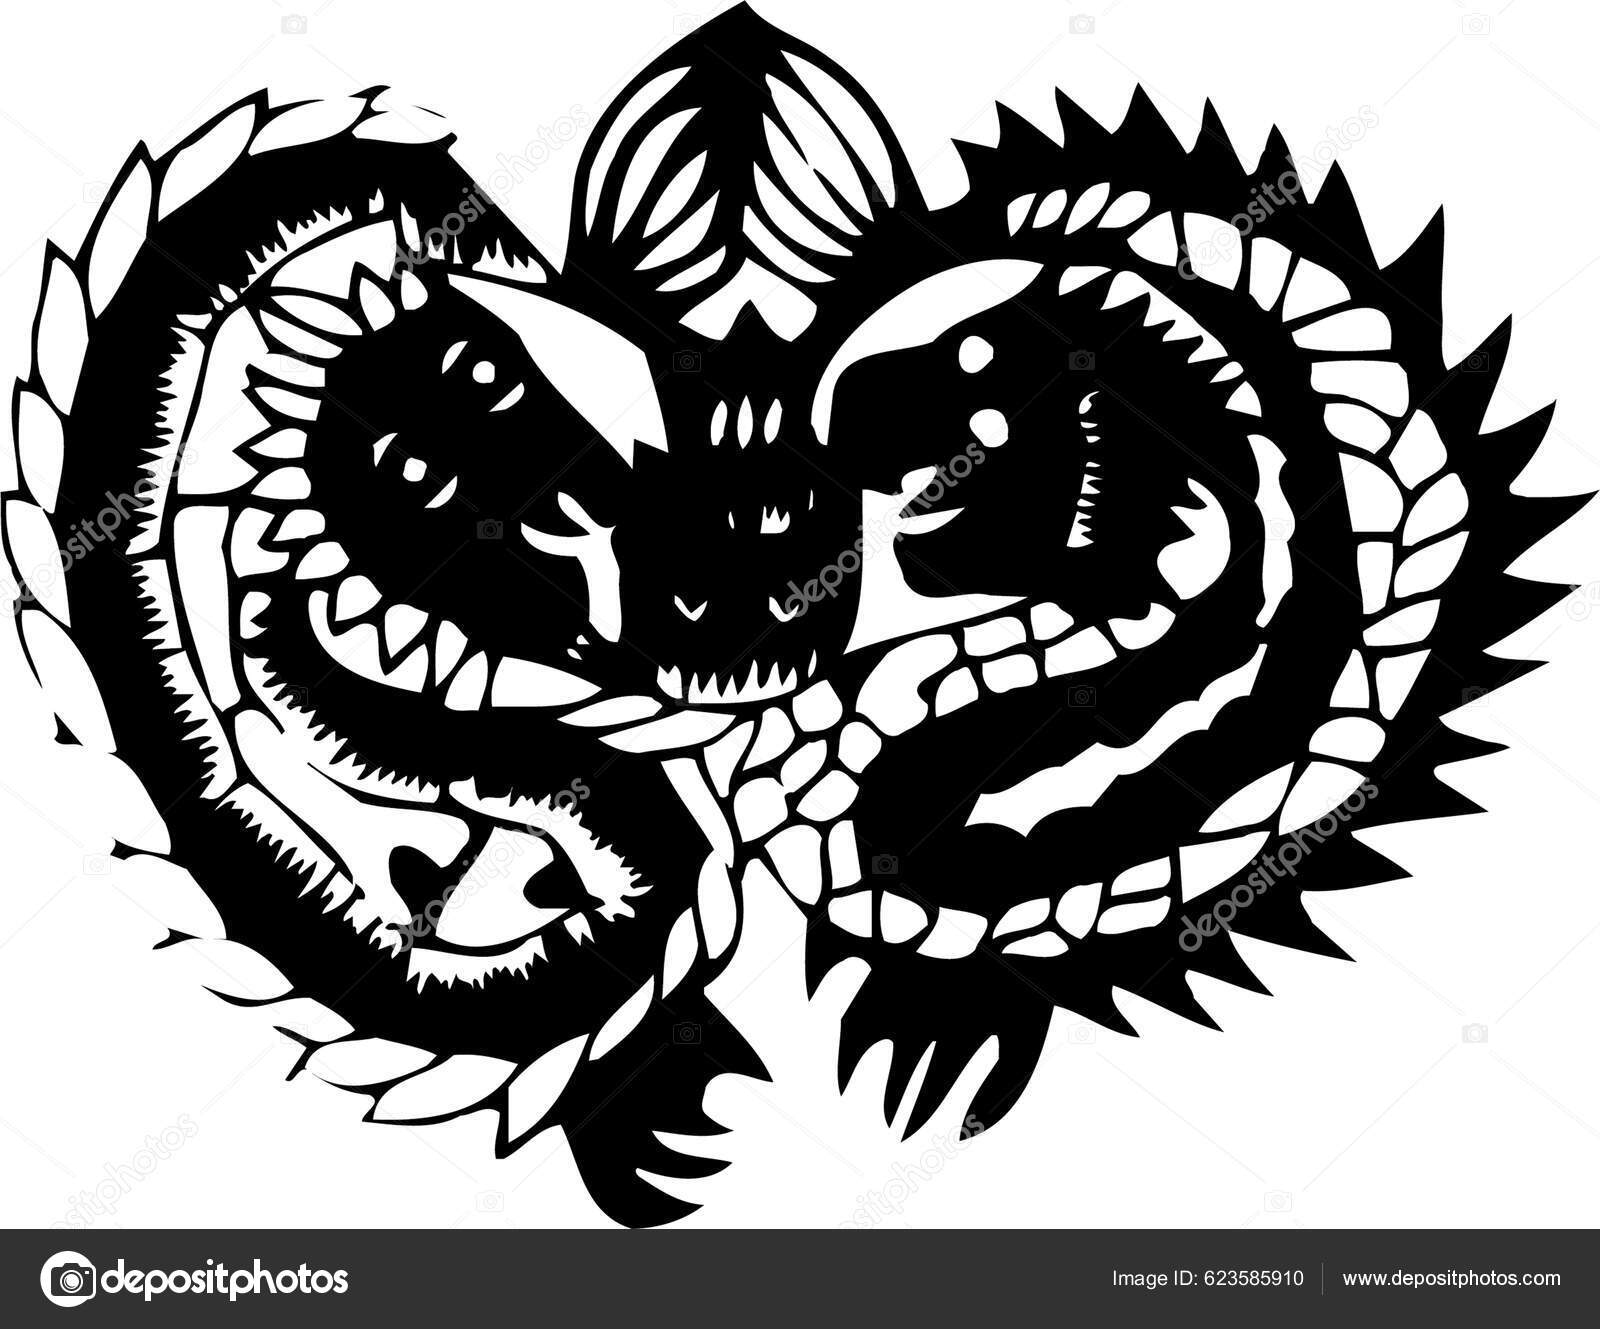 4000 Hydra Stock Photos Pictures  RoyaltyFree Images  iStock  Hydra  greece Hydra monster Hydra mythology